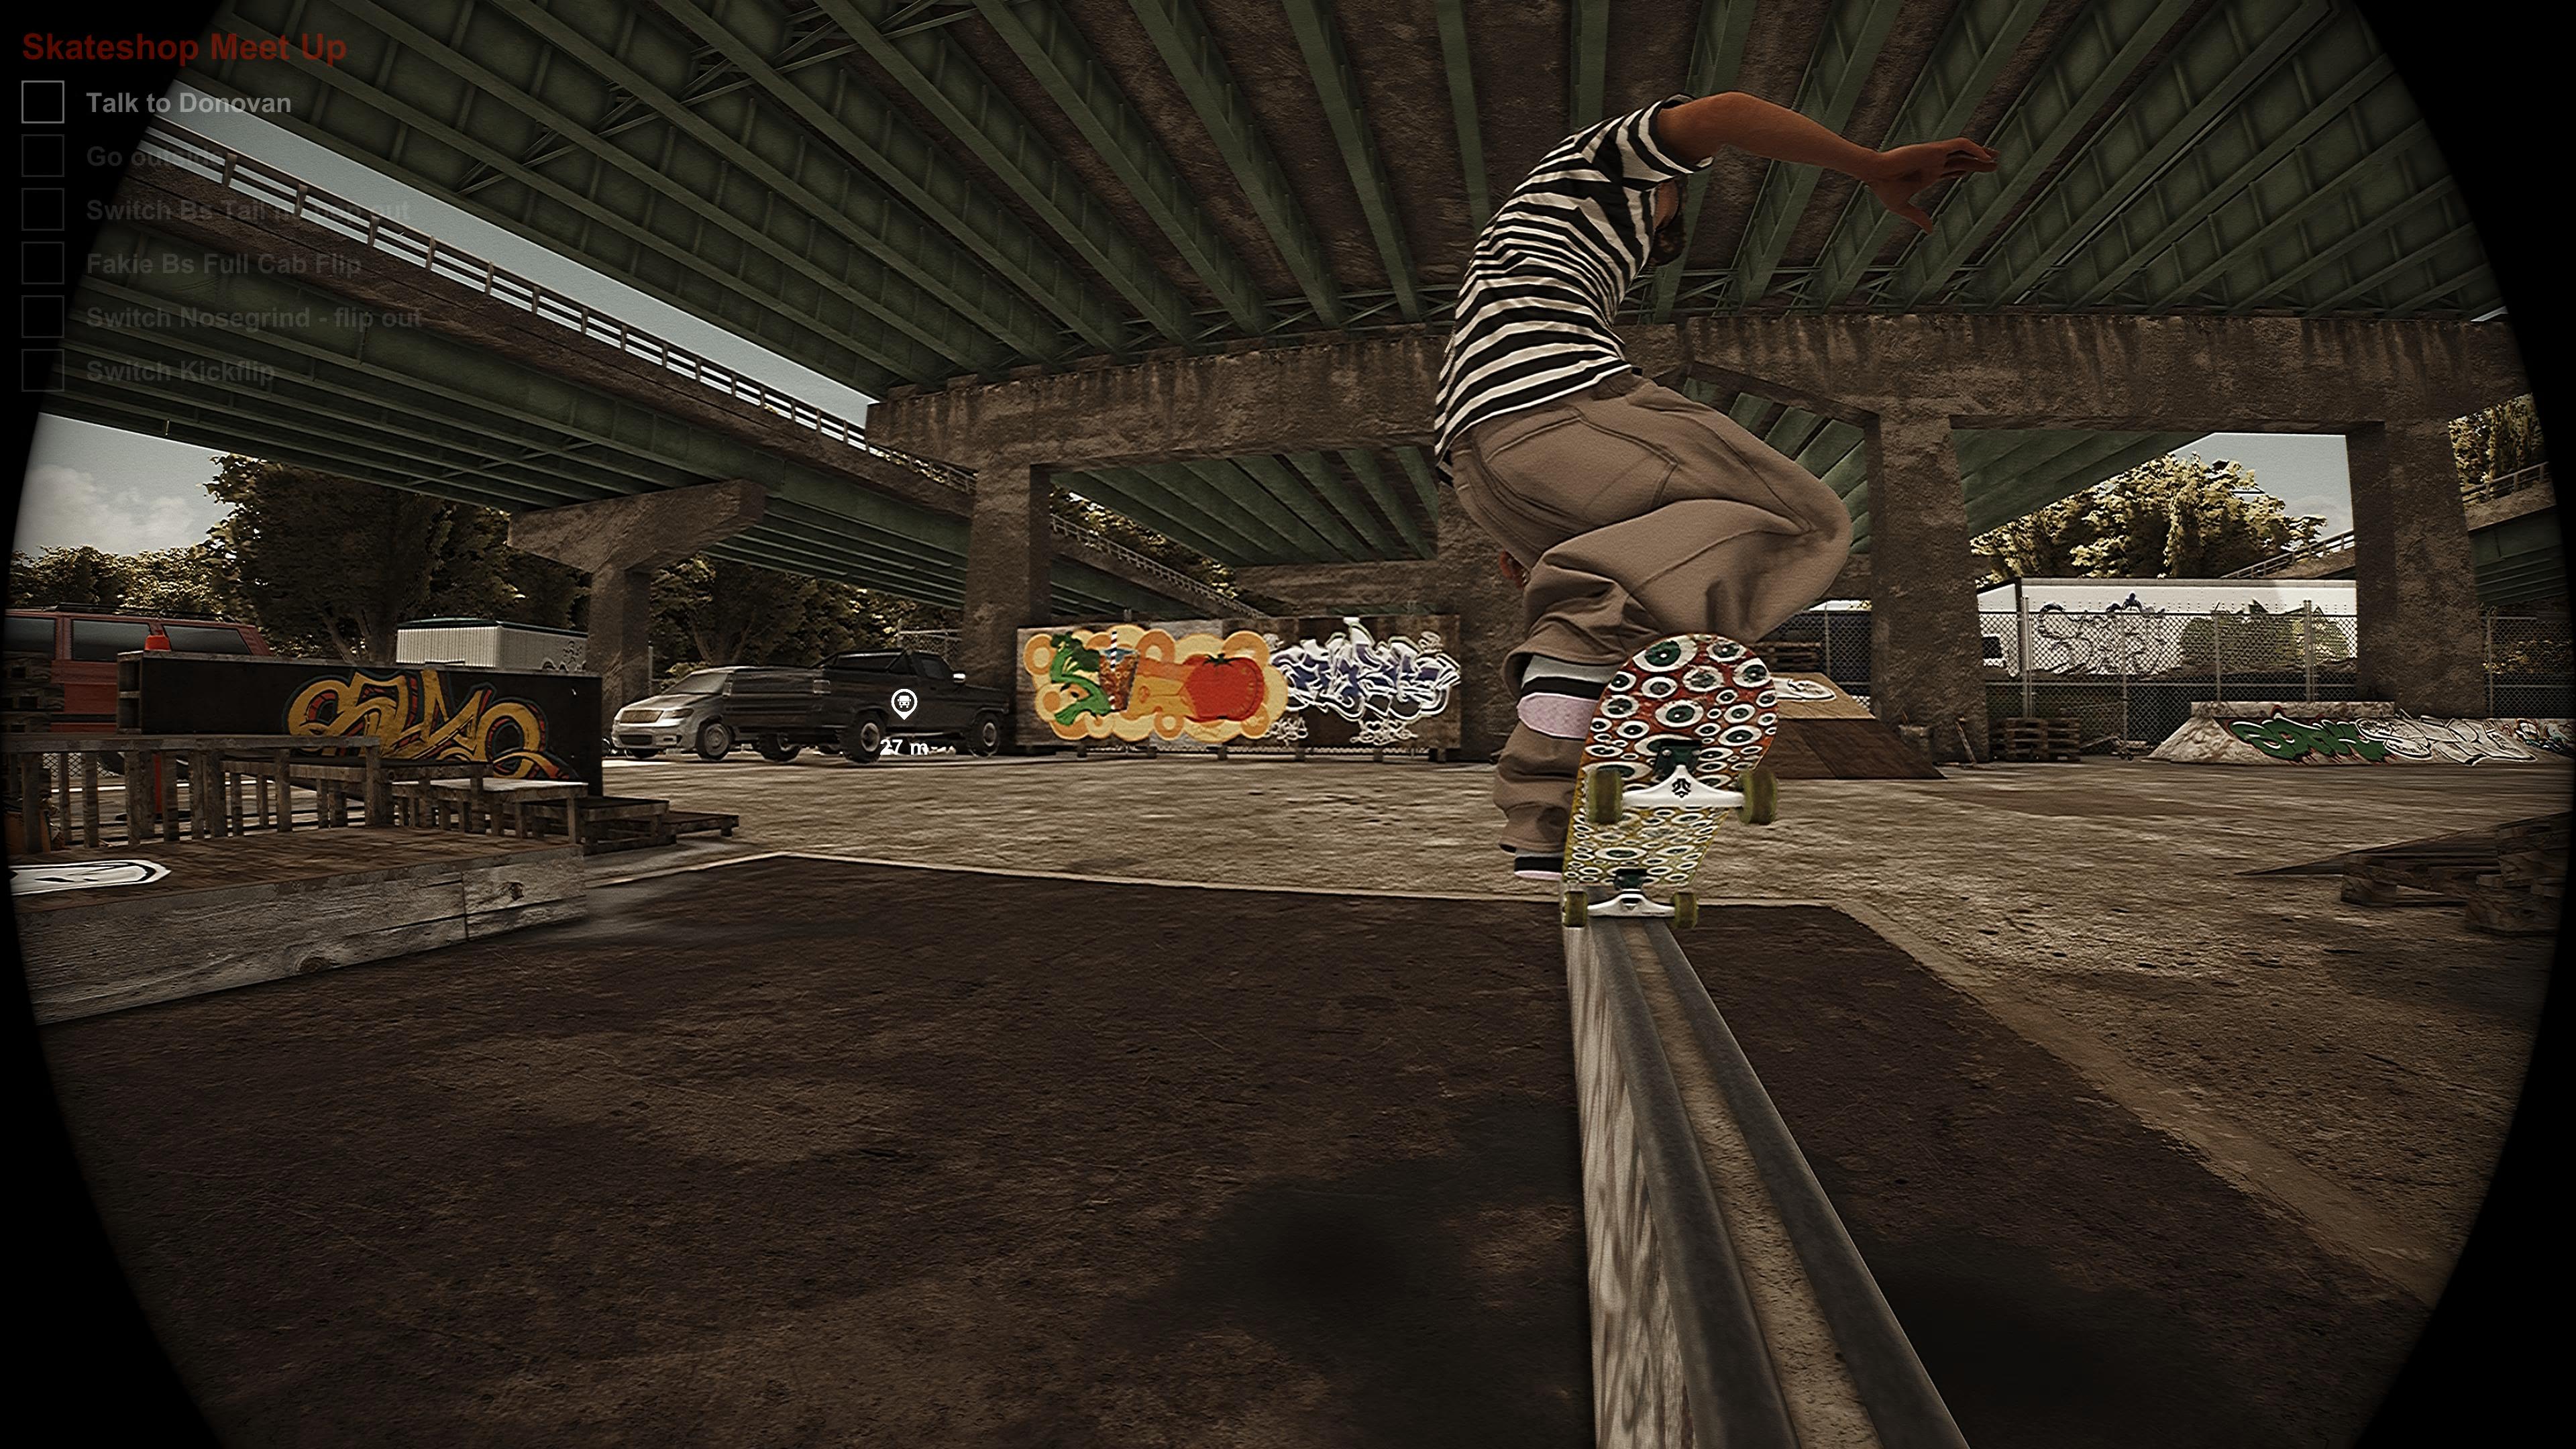 Session Skate Sim Review - Grinding on Rails Under Highway Passover